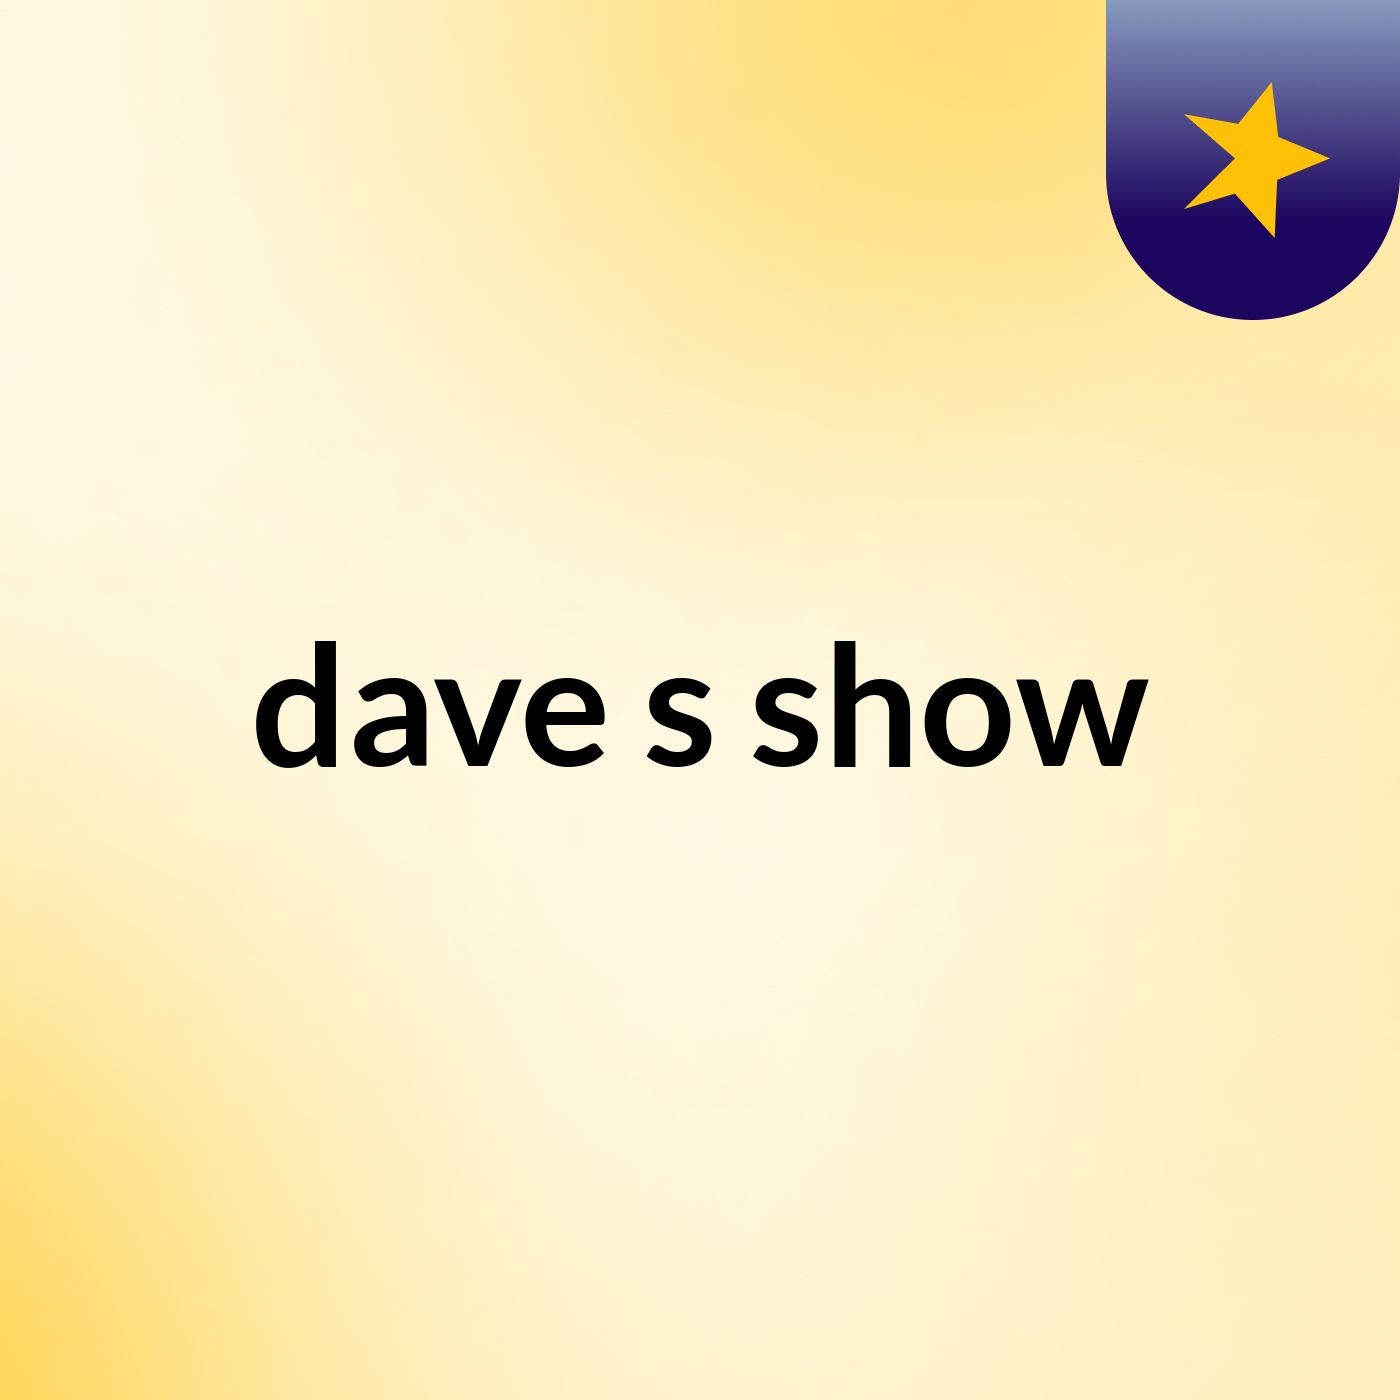 dave's show